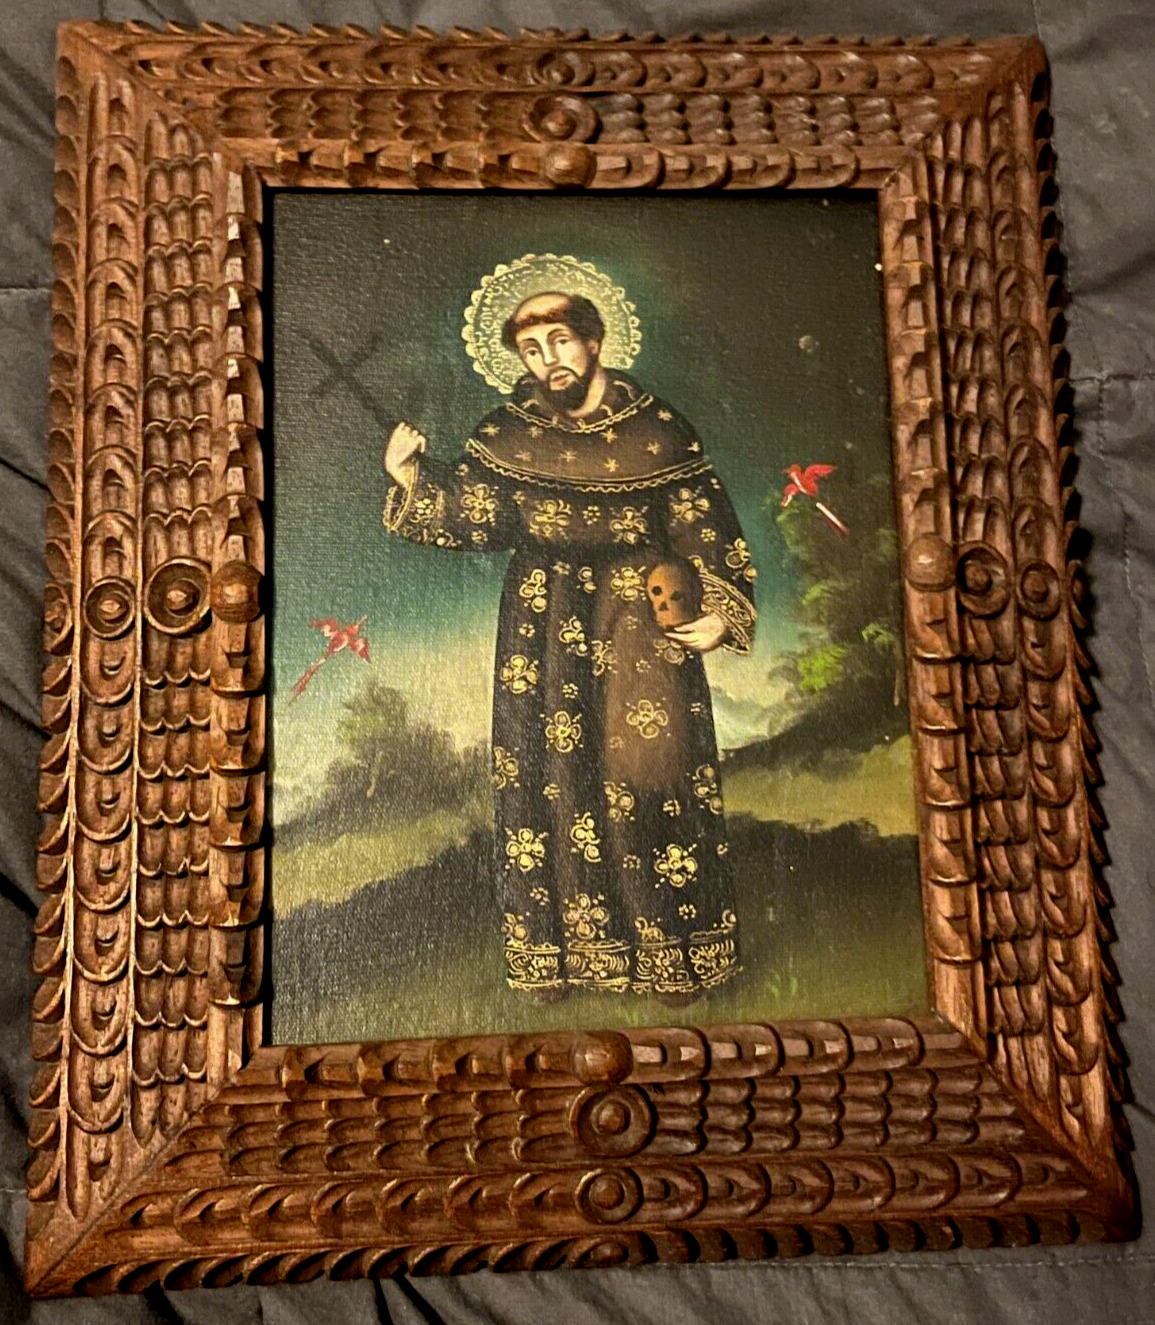 VERY RARE ANTIQUE FRAMED HAND PAINTED ST. FRANCIS OF ASSISI CANVAS ICON